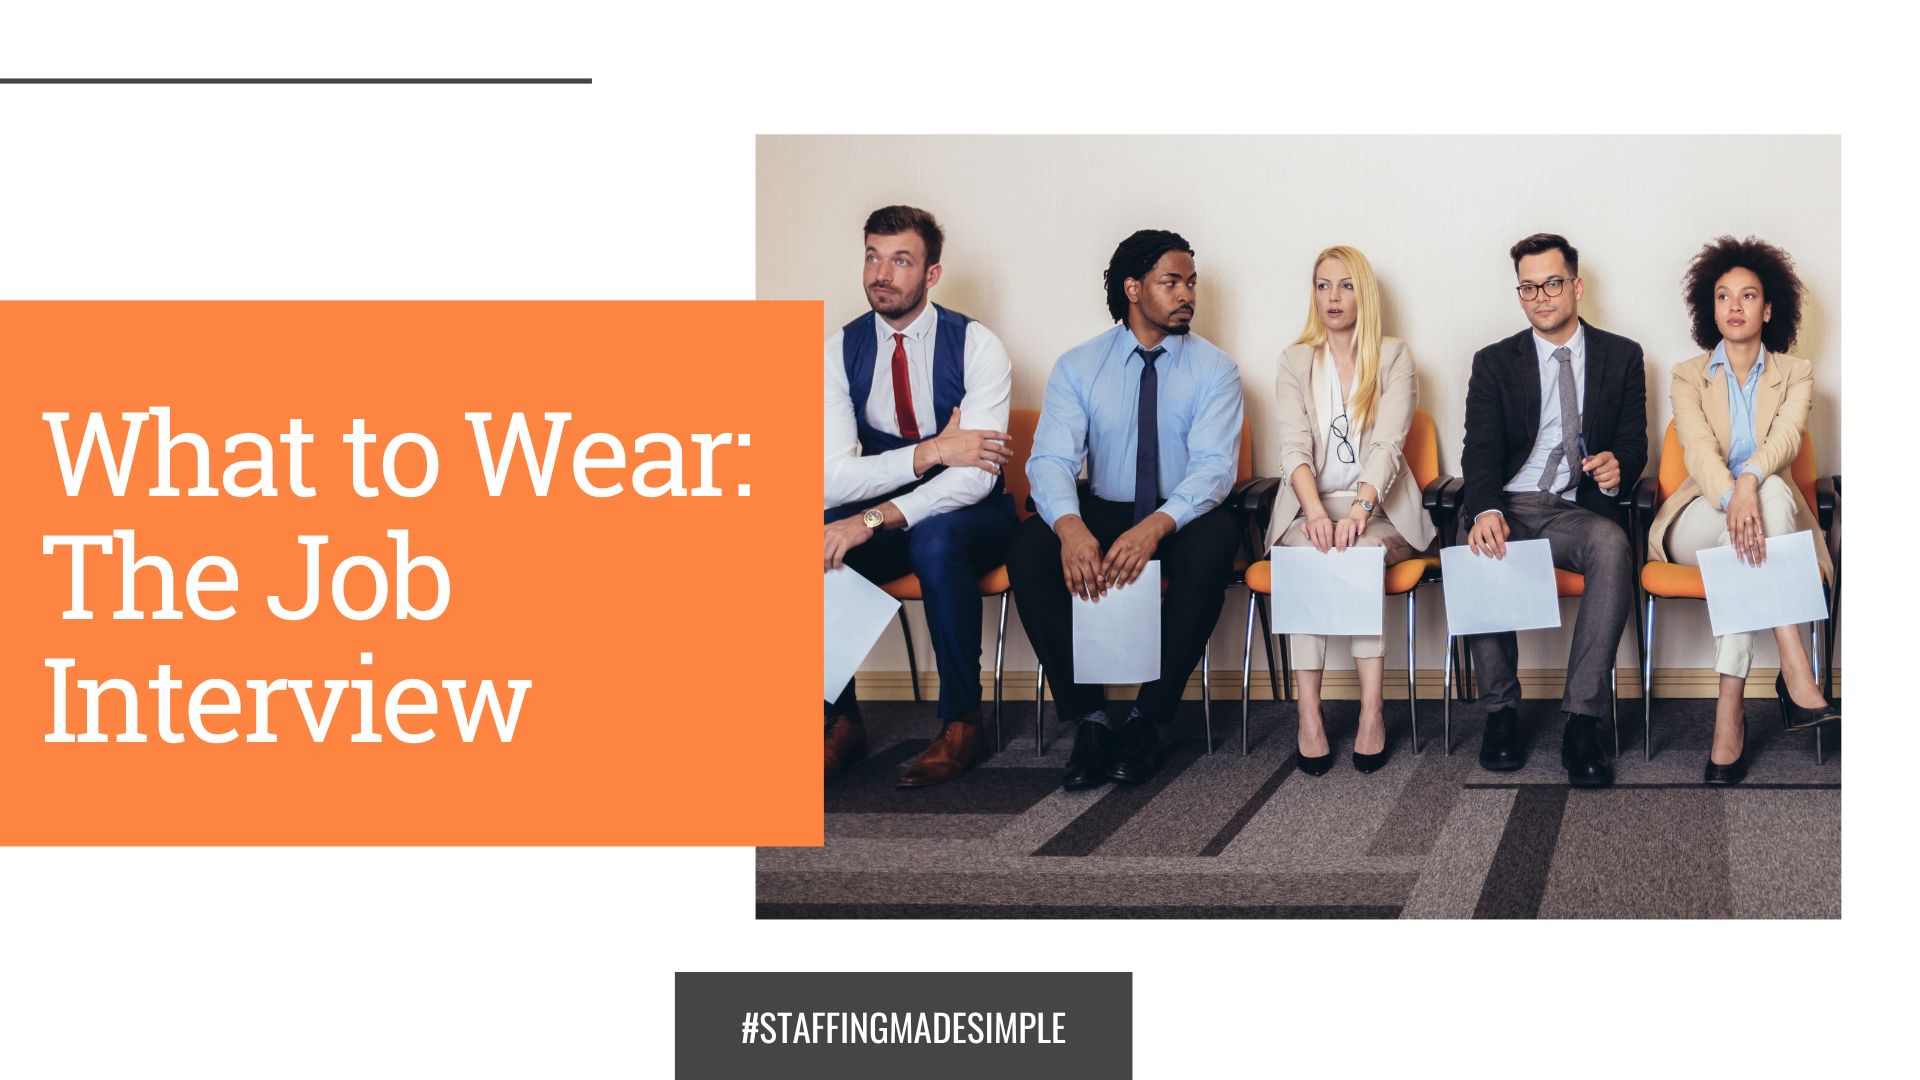 What to Wear to an Interview - PeopleFirst Staffing